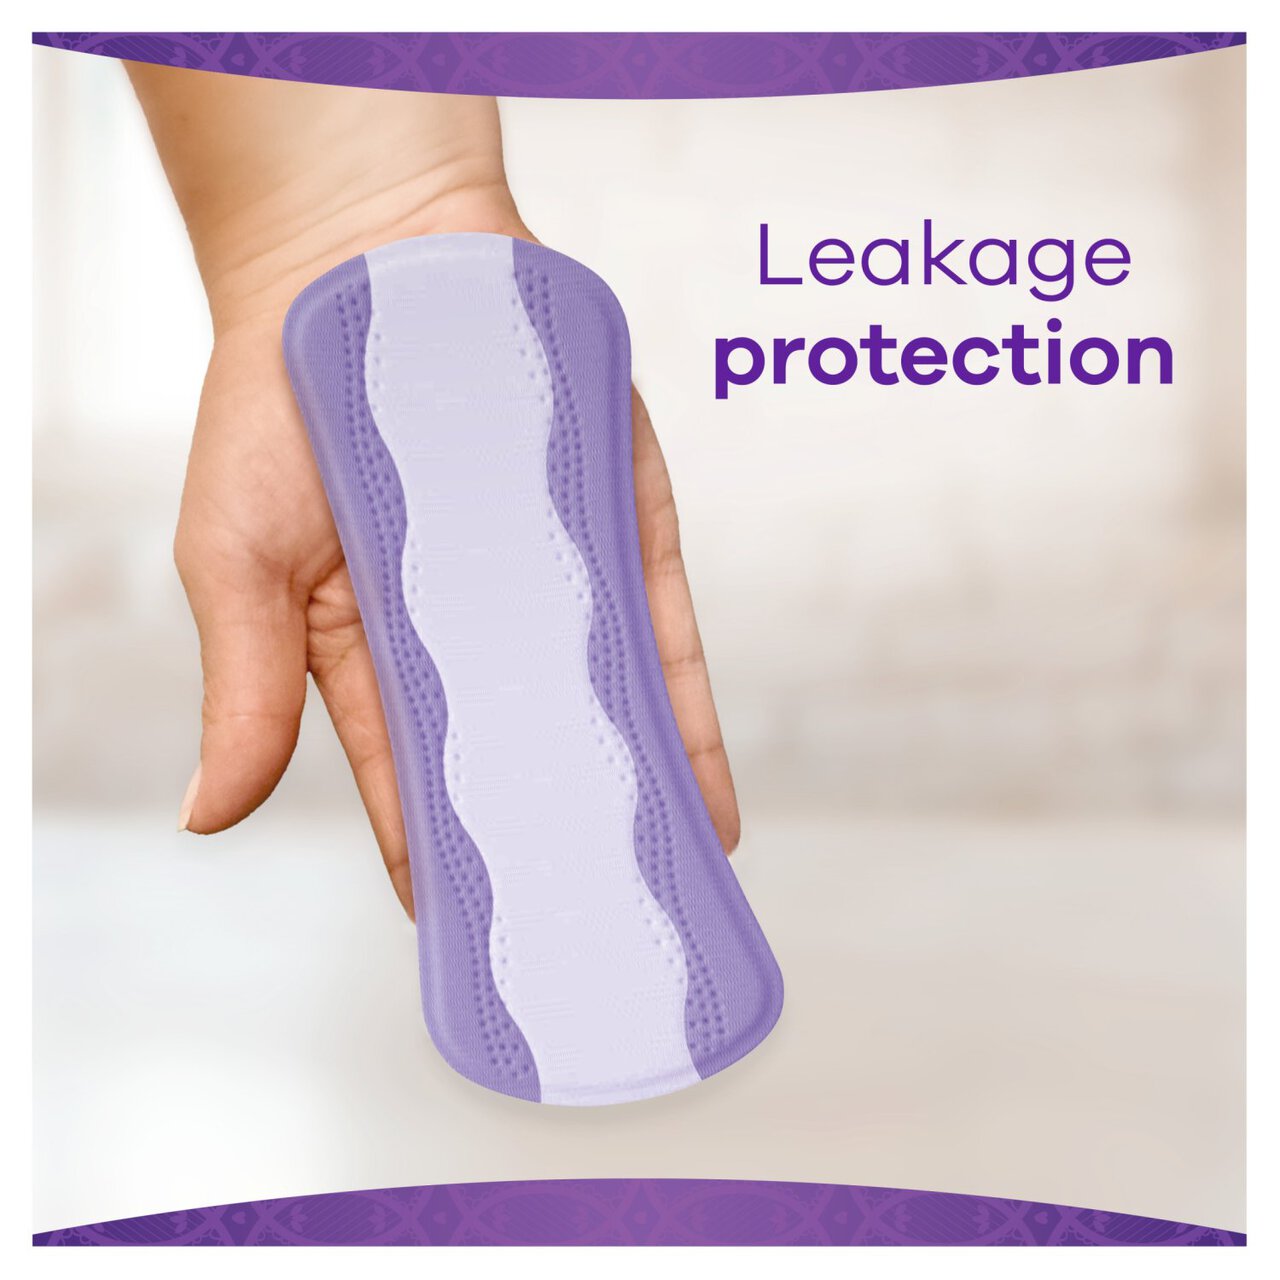 Always Dailies Extra Protect Long Plus Panty Liners 24 per pack